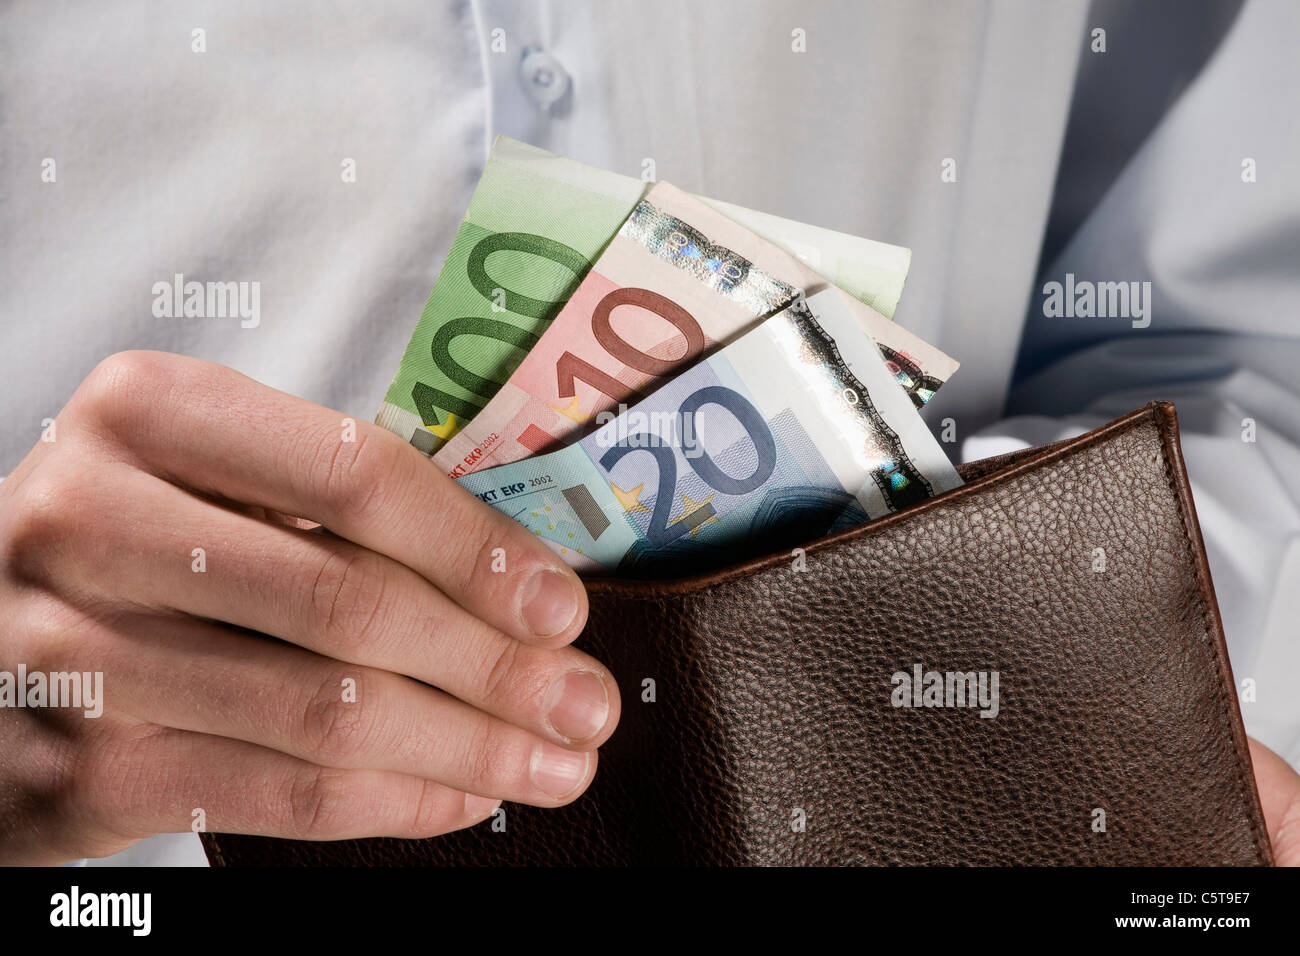 Person counting Euro notes, close-up Stock Photo